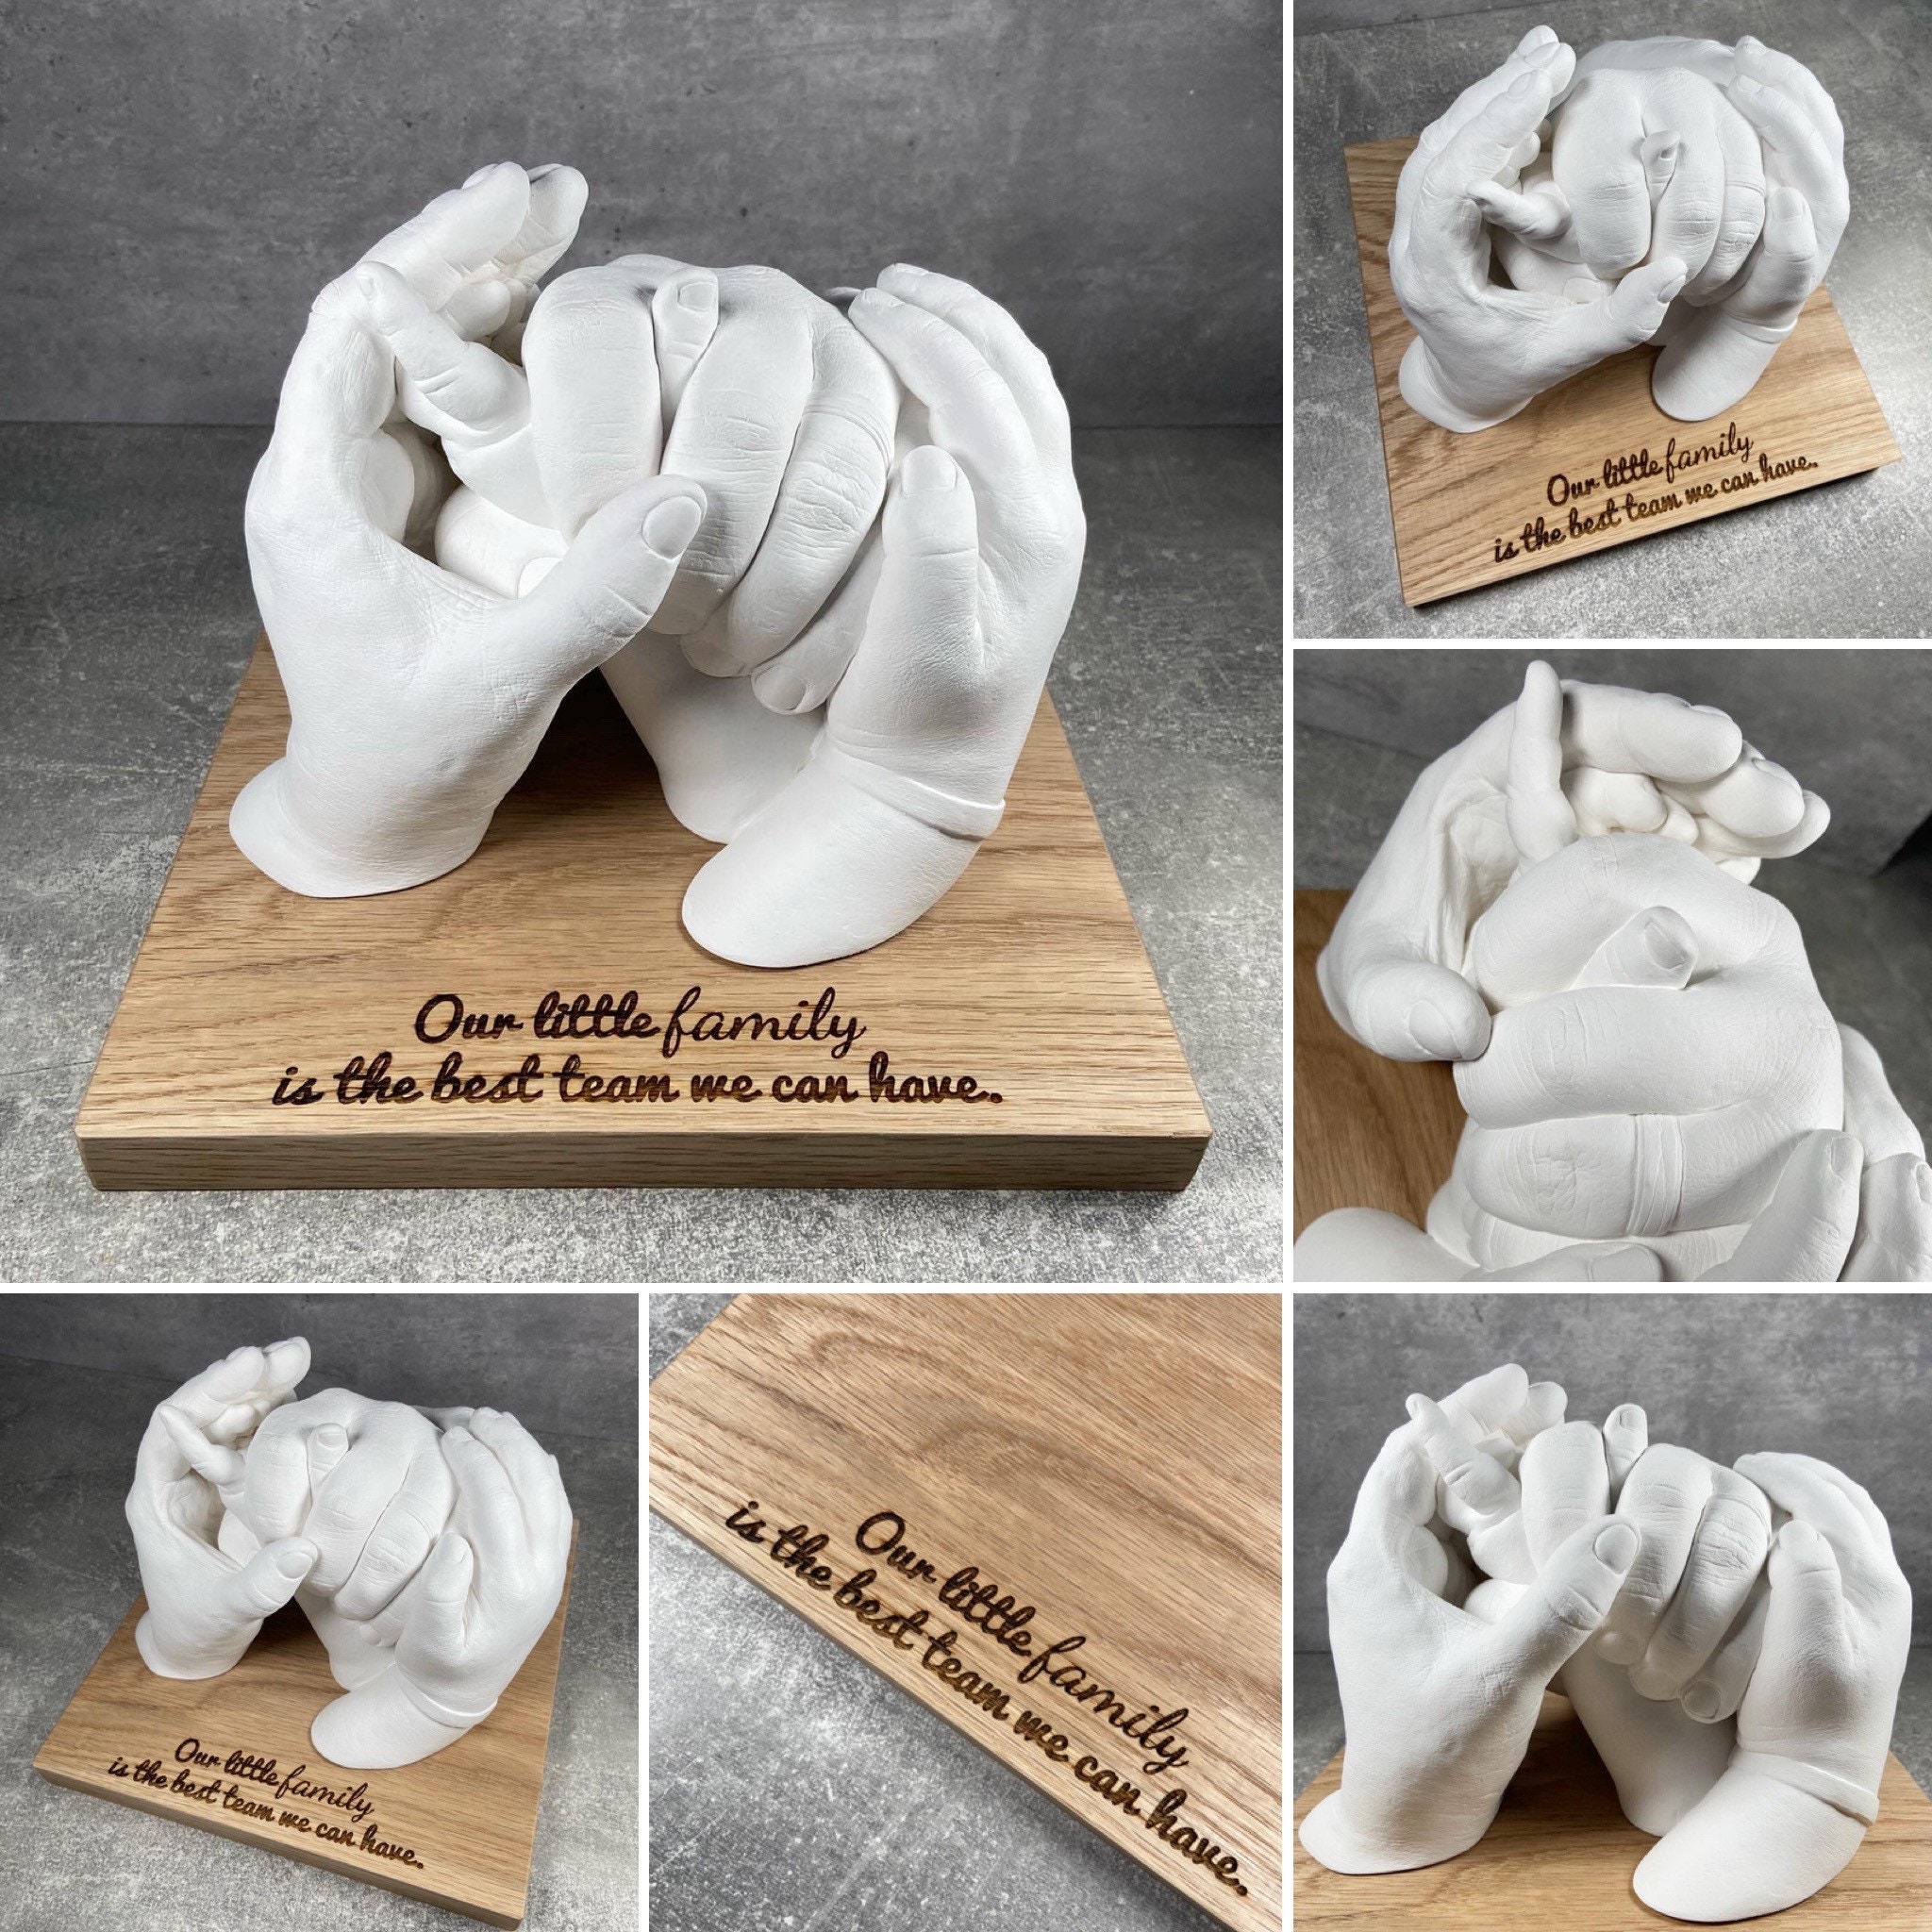 Buy Hand Molds Casting Kit - DIY Hand Casting Kit Family Size Hand  Sculpture Kit, Couples Anniversary Keepsake Hands XL for Friends and Family  - Hand Mold Casting Kit Wedding Gifts for